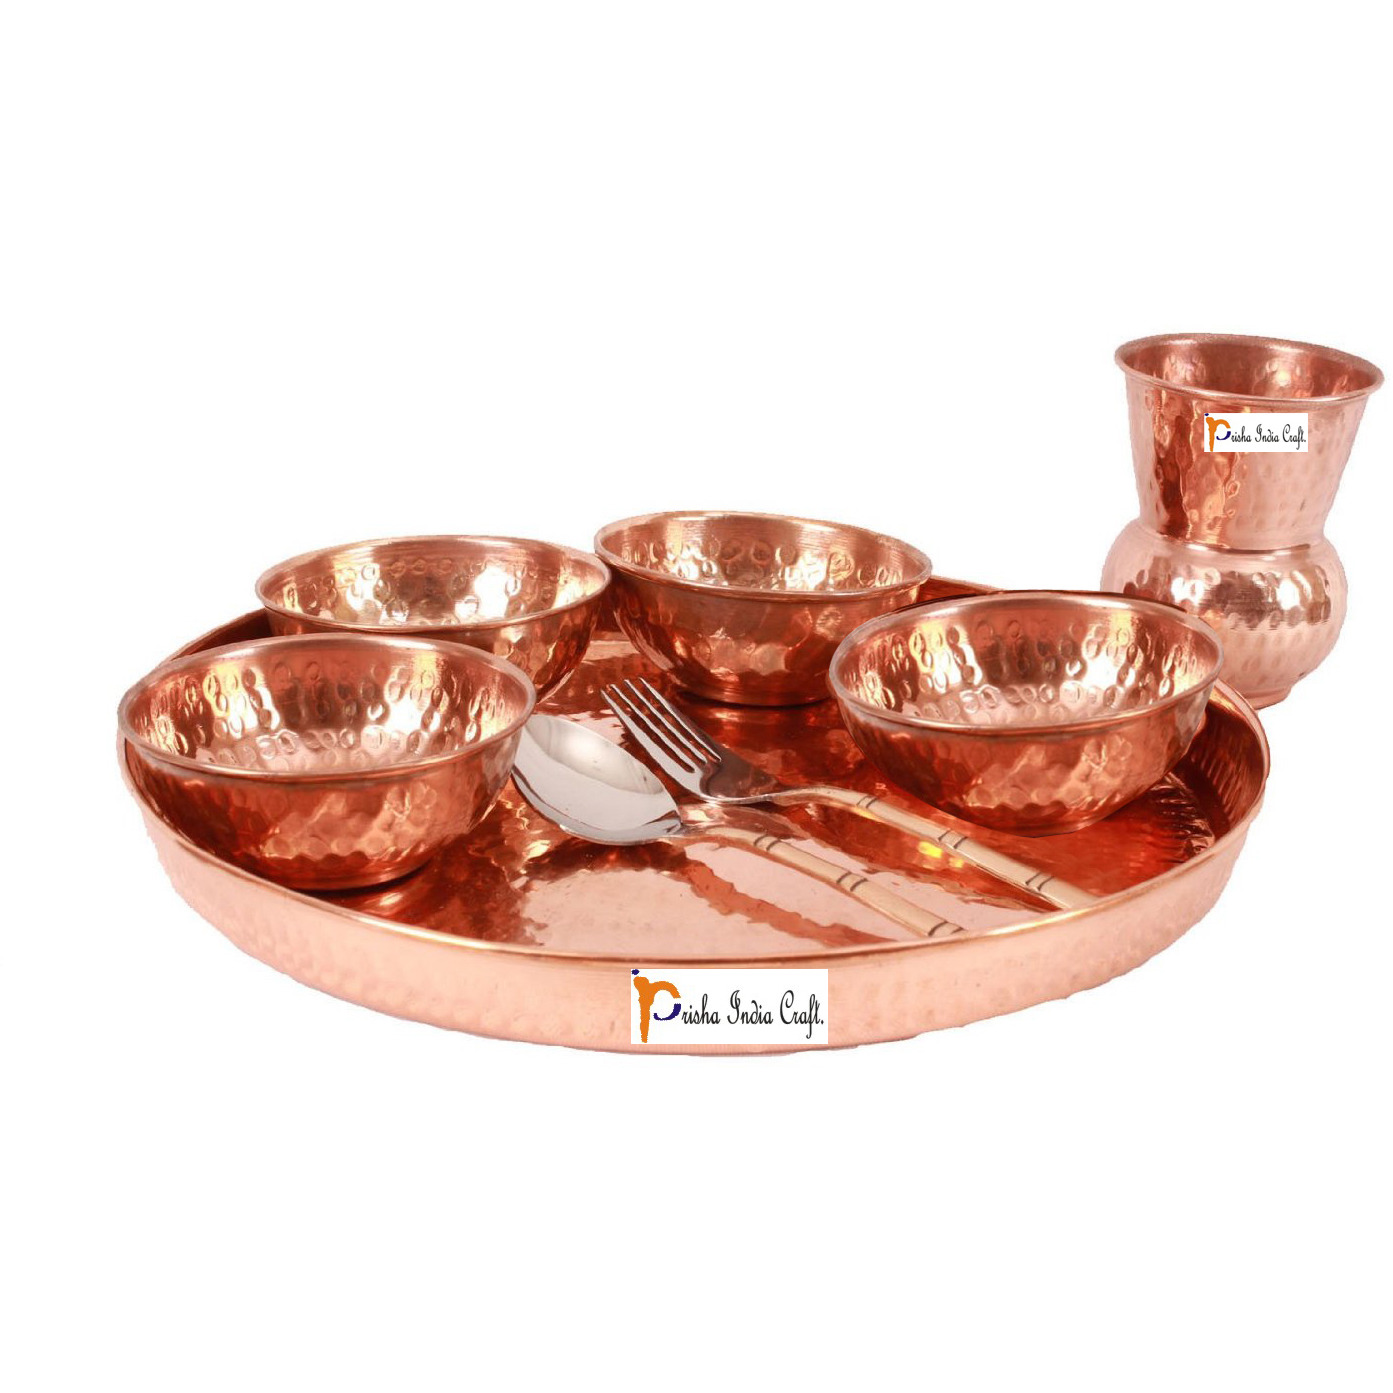 Prisha India Craft B. Dinnerware Traditional 100% Pure Copper Dinner Set of Thali Plate, Bowls, Glass and Spoon, Dia 12  With 1 Luxury Style Pitcher Jug - Christmas Gift